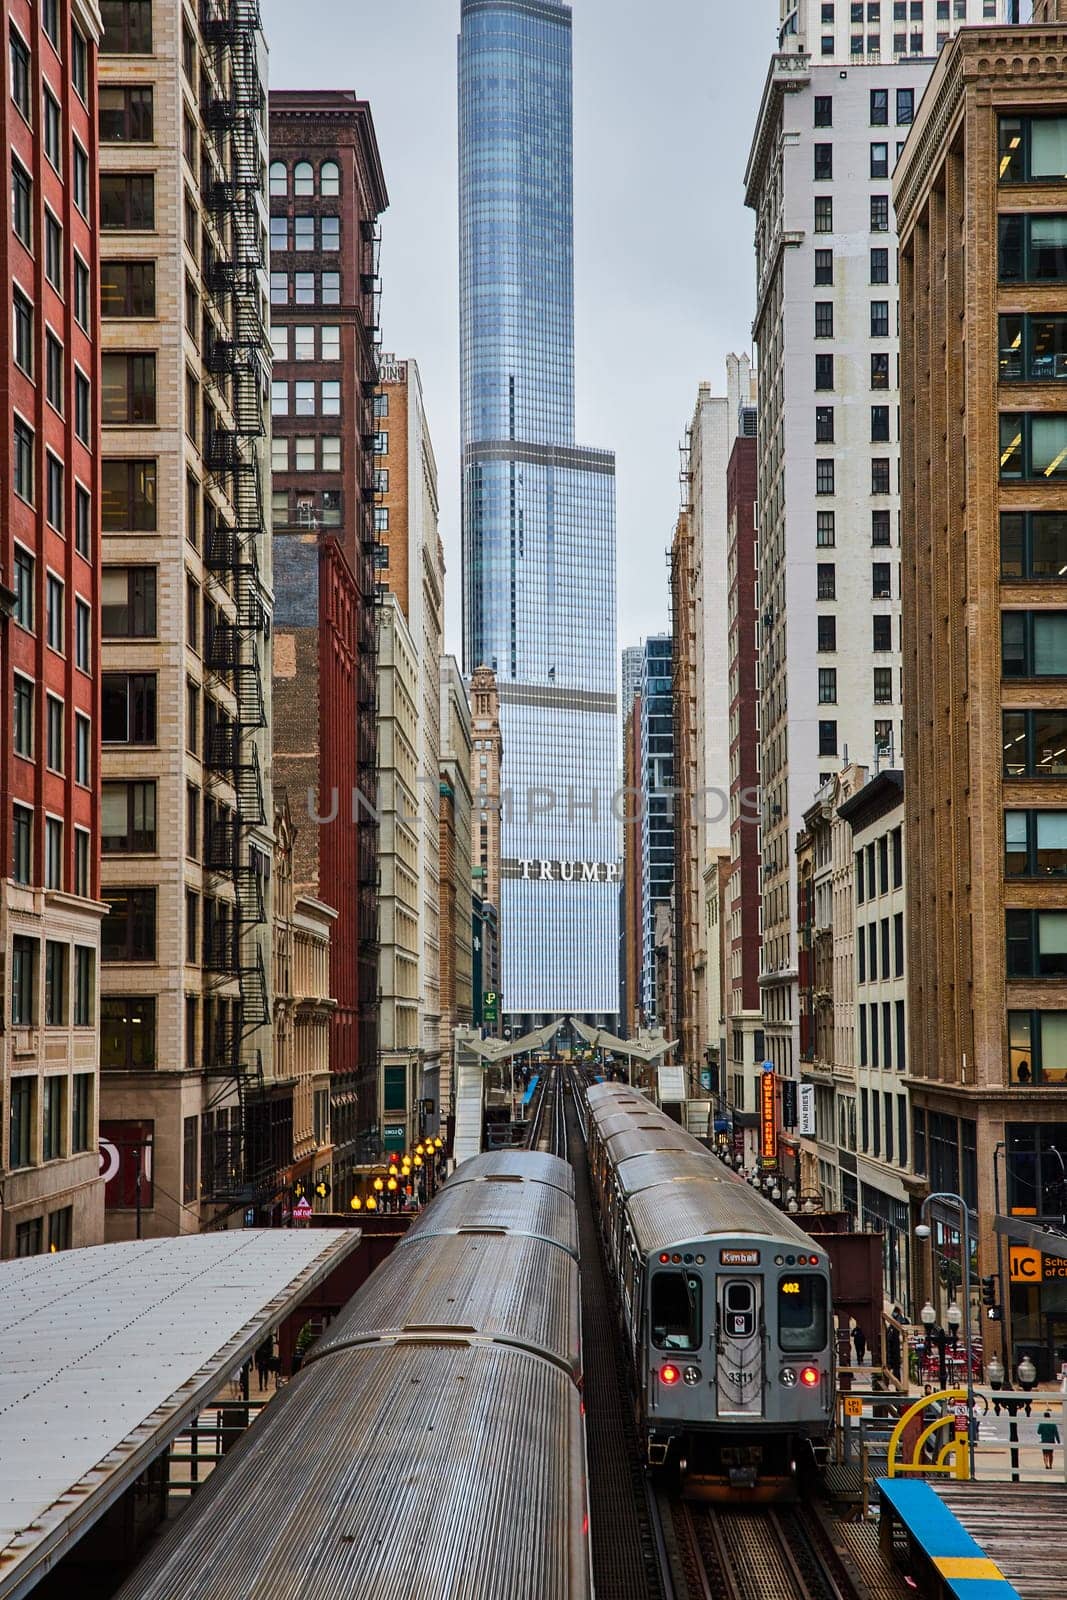 Elevated Trains and Skyscraper in Urban Chicago, Eye-Level View by njproductions